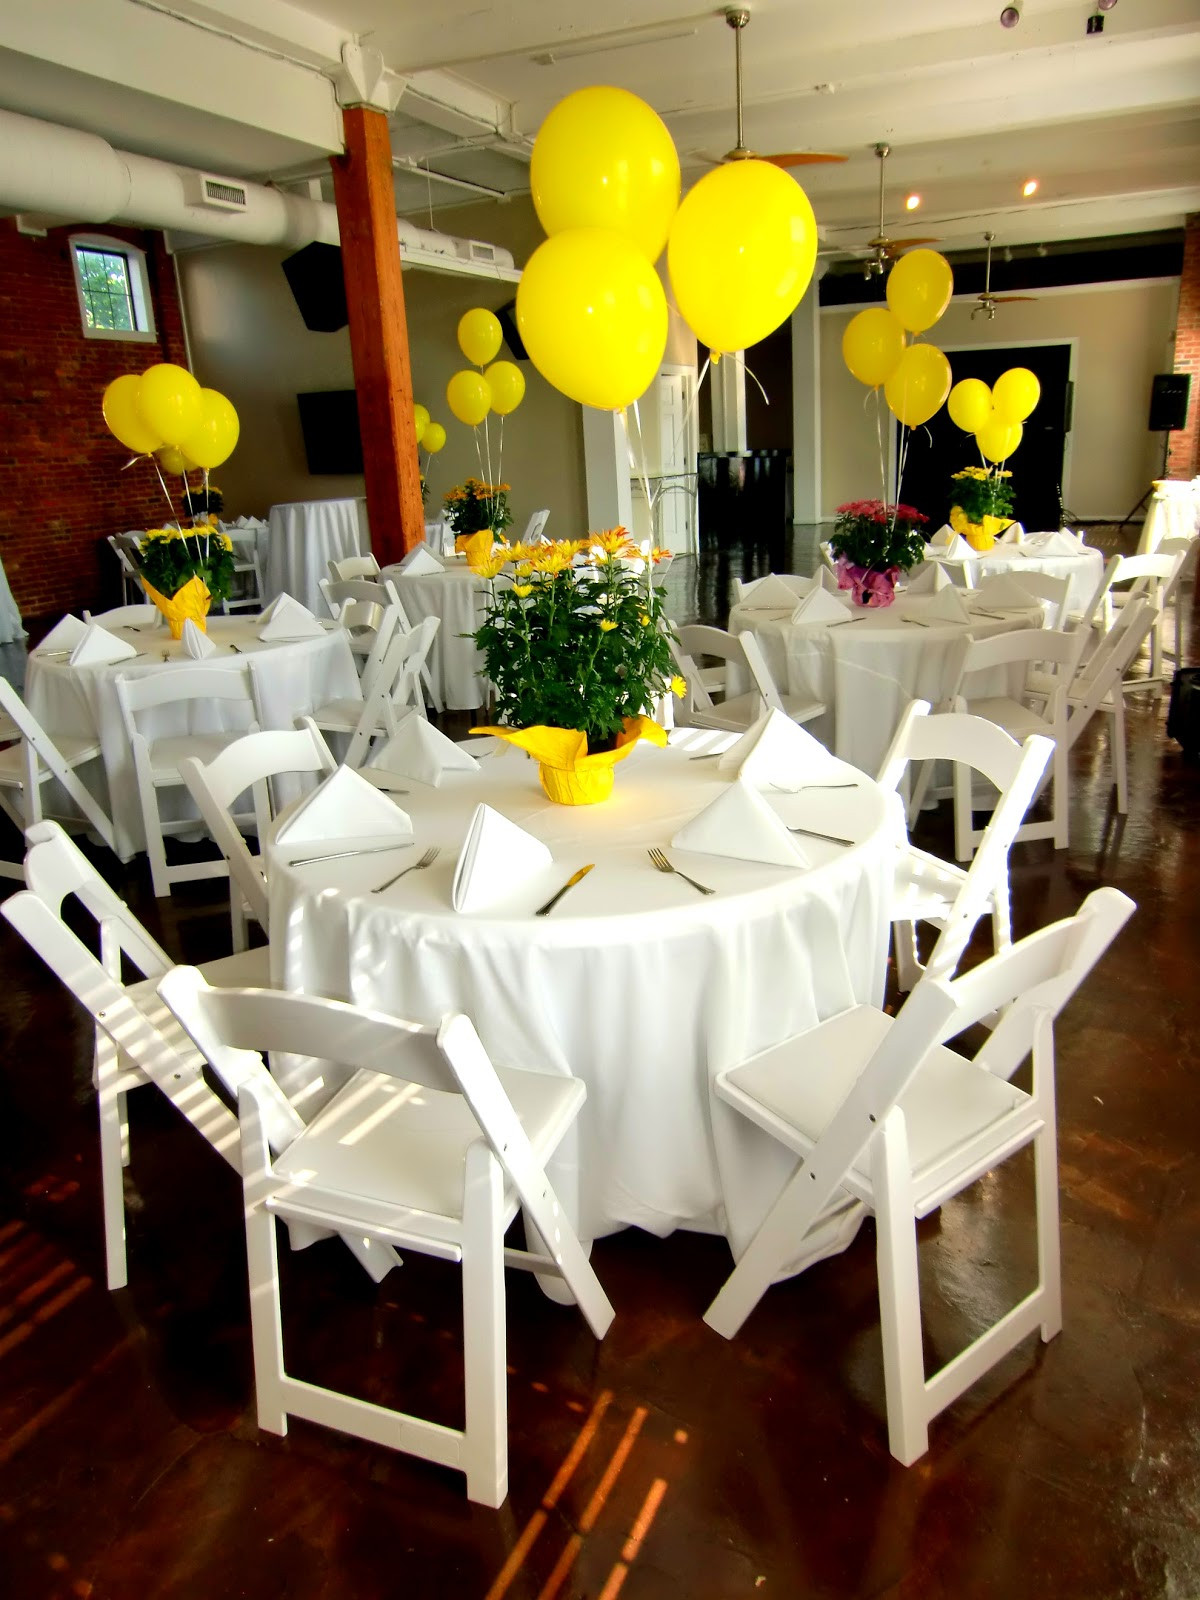 60th Birthday Party Ideas
 Surprise 60th Birthday Party in July RSVP The RiverRoom